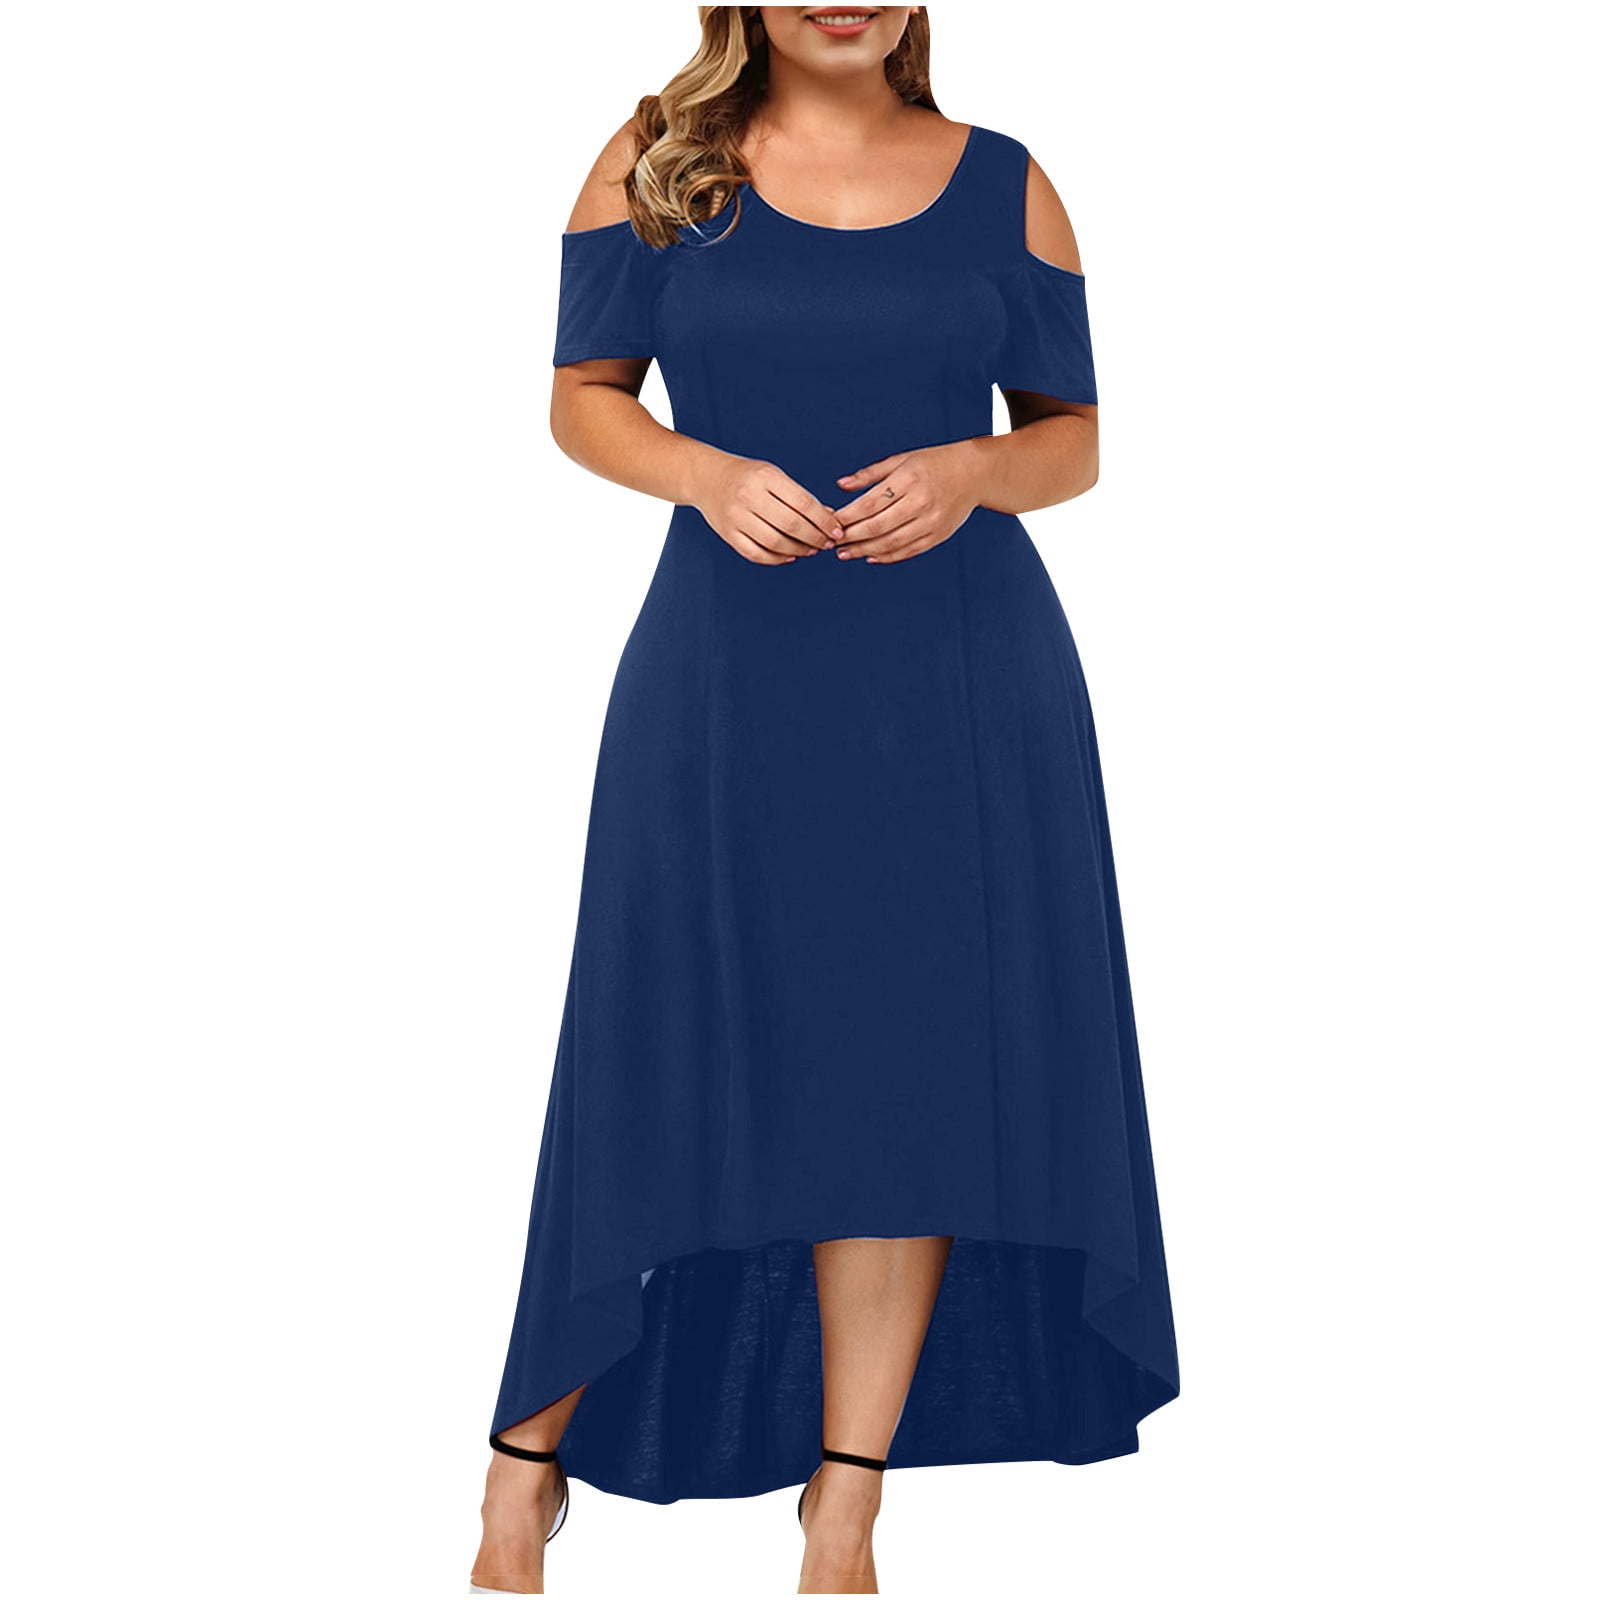 FAFWYP Womens Plus Size Solid Swing Maxi Dress Sexy Off-The